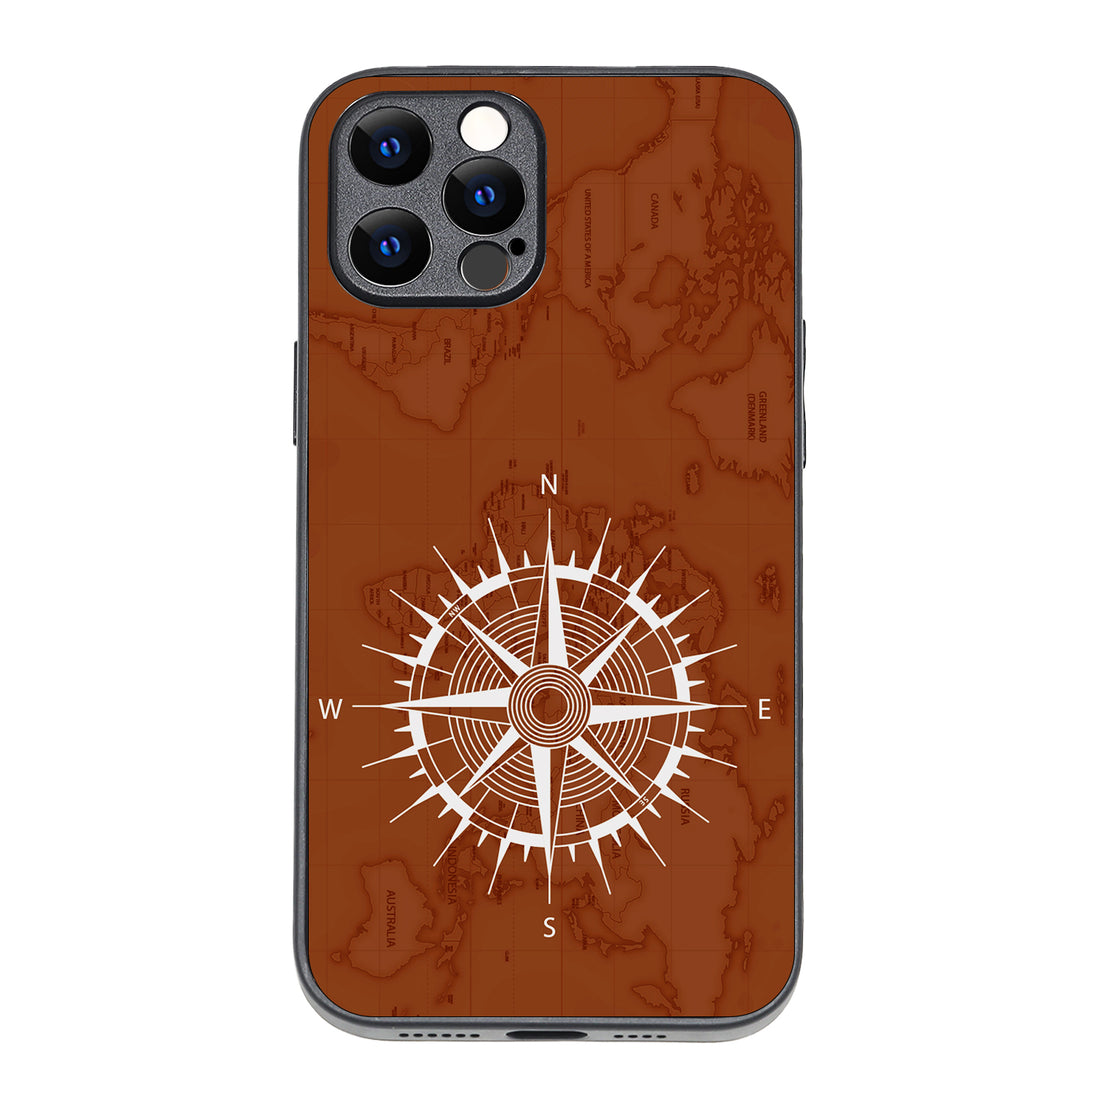 Compass Travel iPhone 12 Pro Max Case